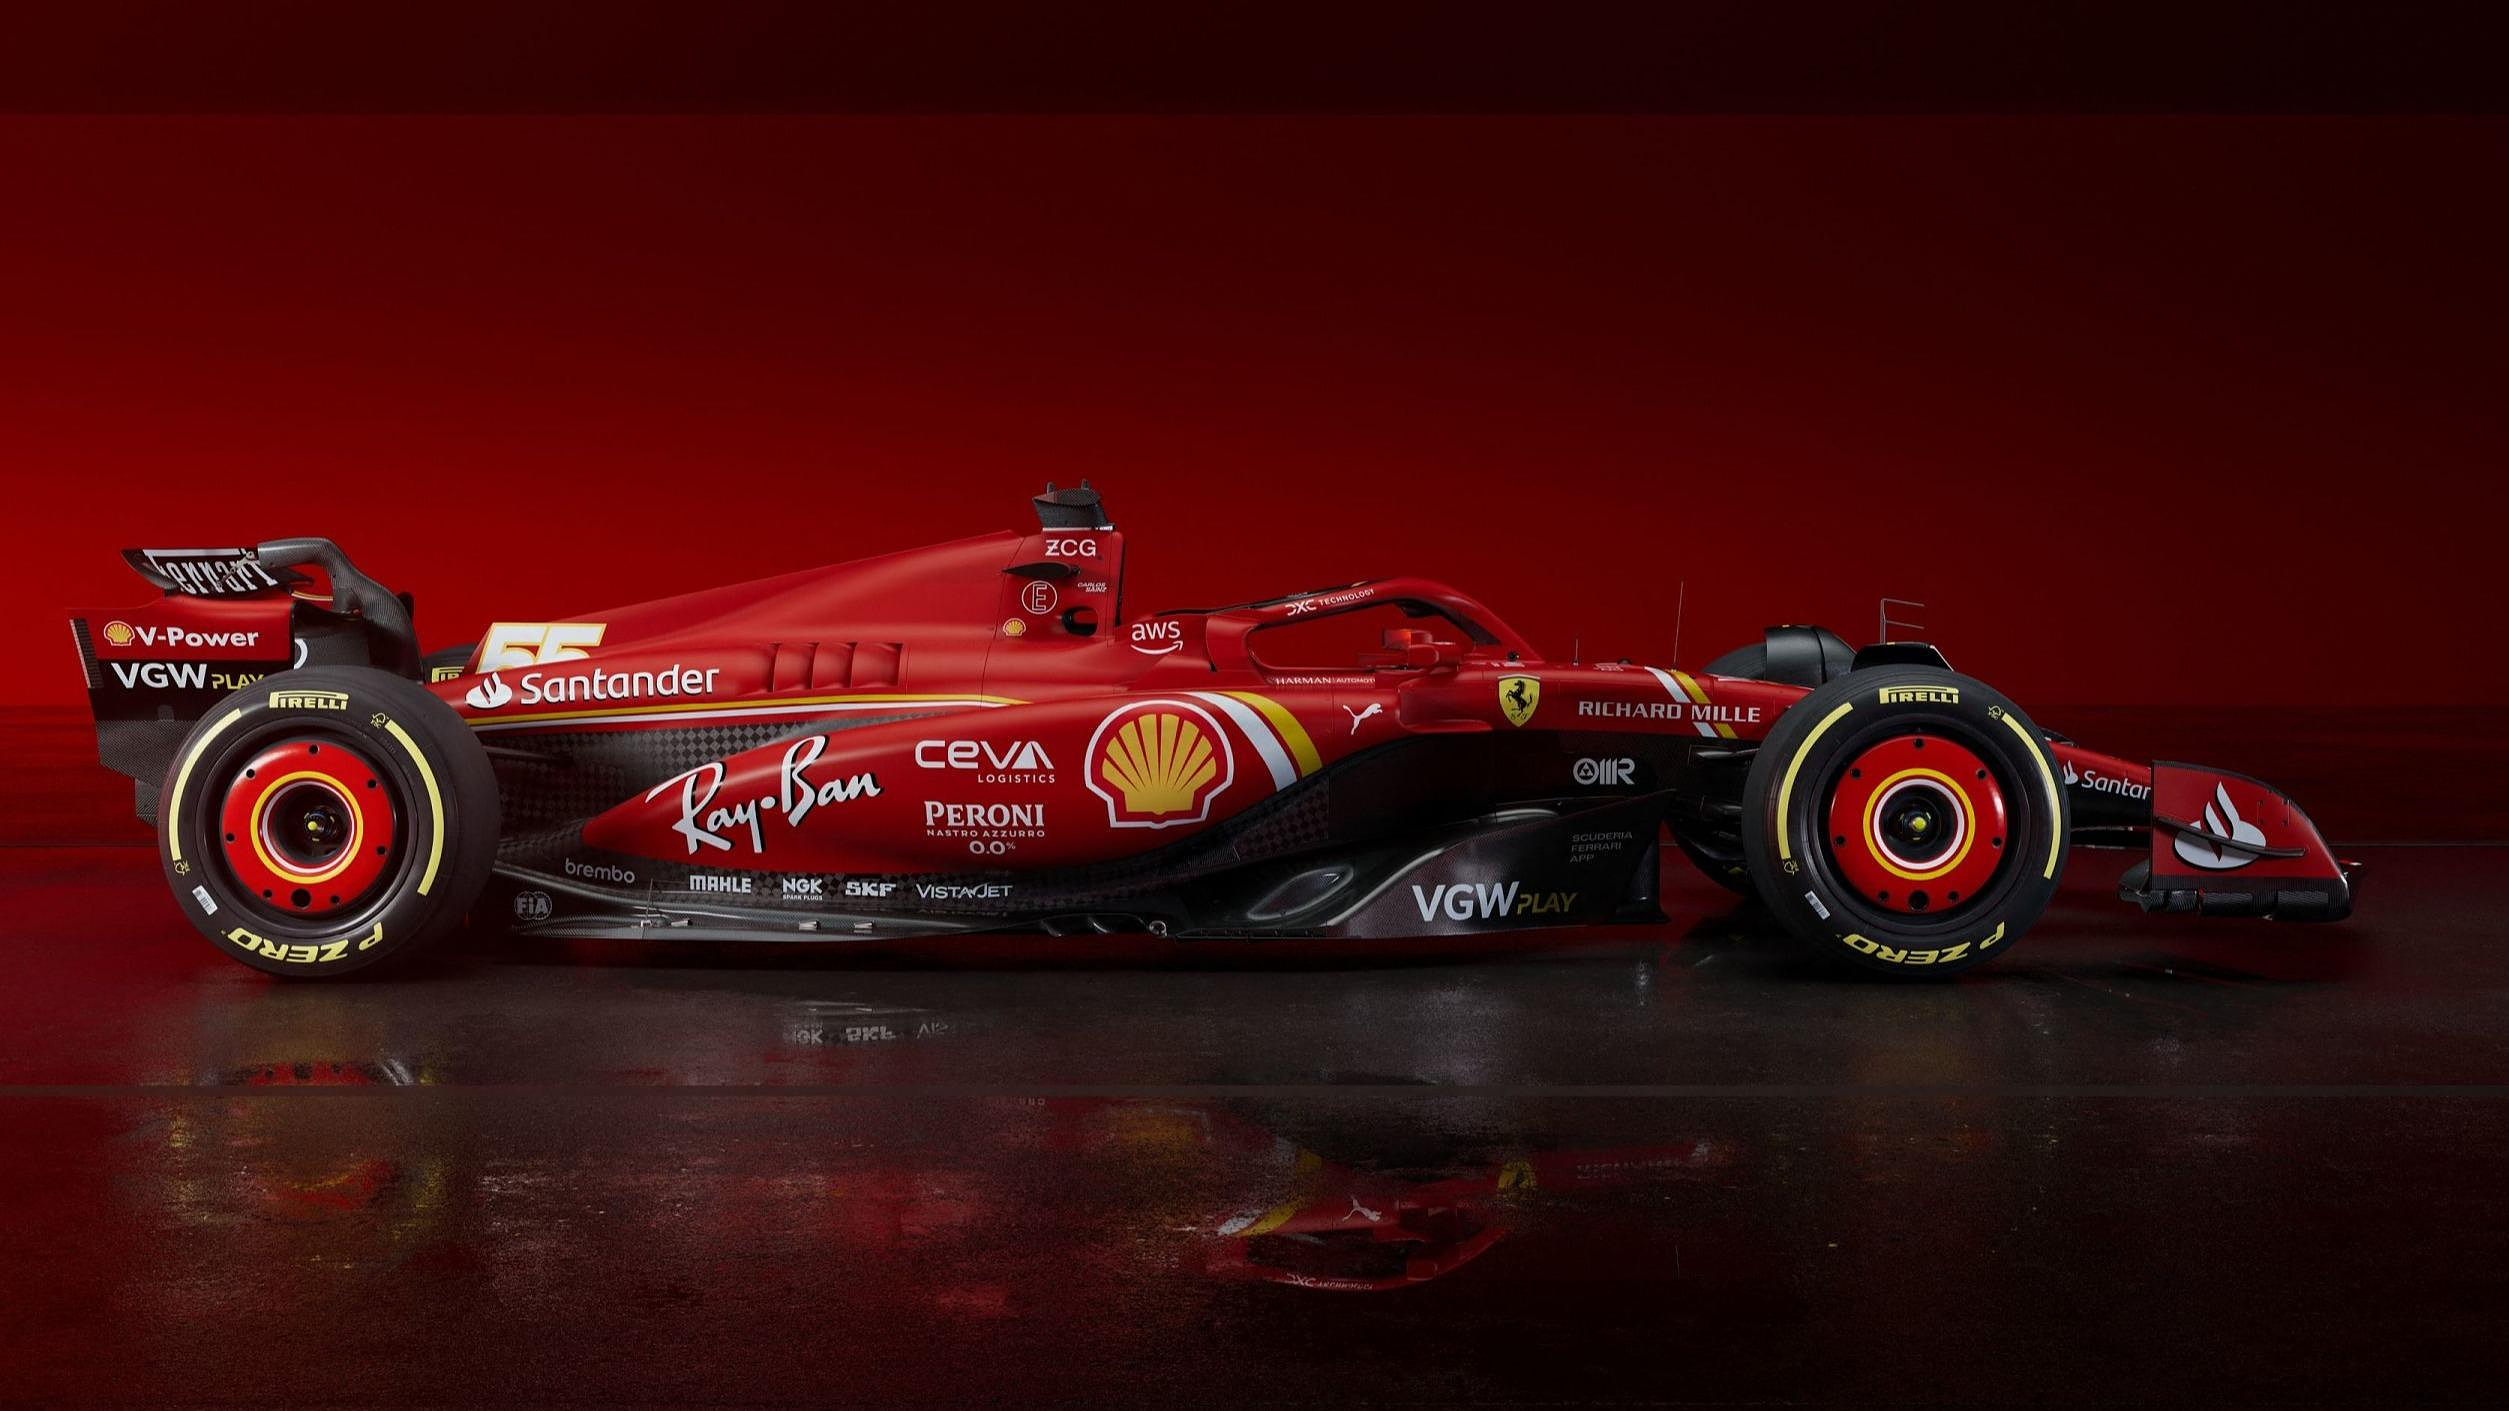 Formula 1: Ferrari’s new single-seater “in continuity” with the previous one